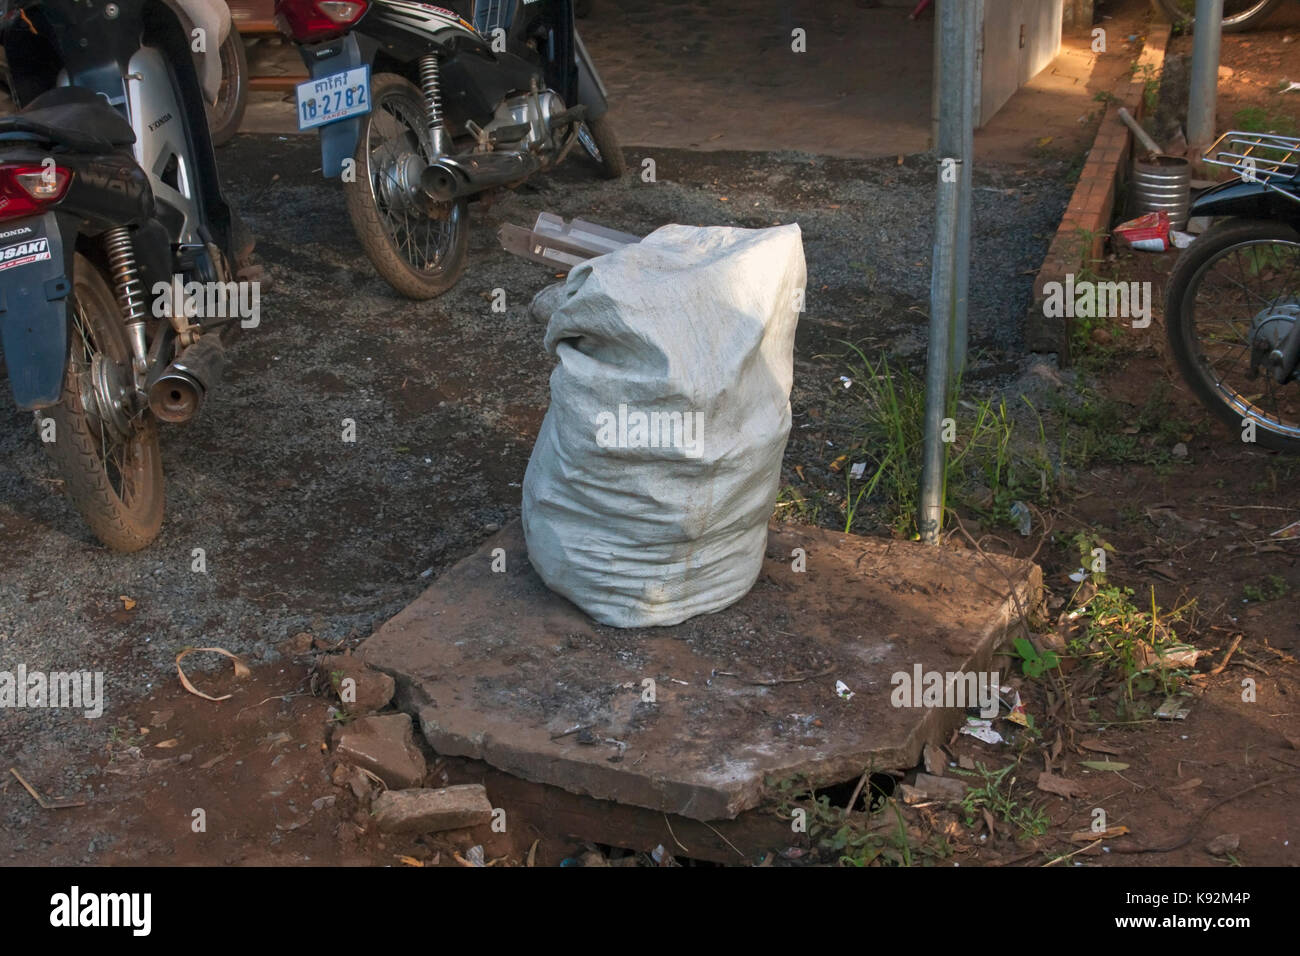 A sack stuffed with marked ballots rests on the ground before the ballots are counted for the 2017 commune elections in Chork Village, Cambodia. Stock Photo